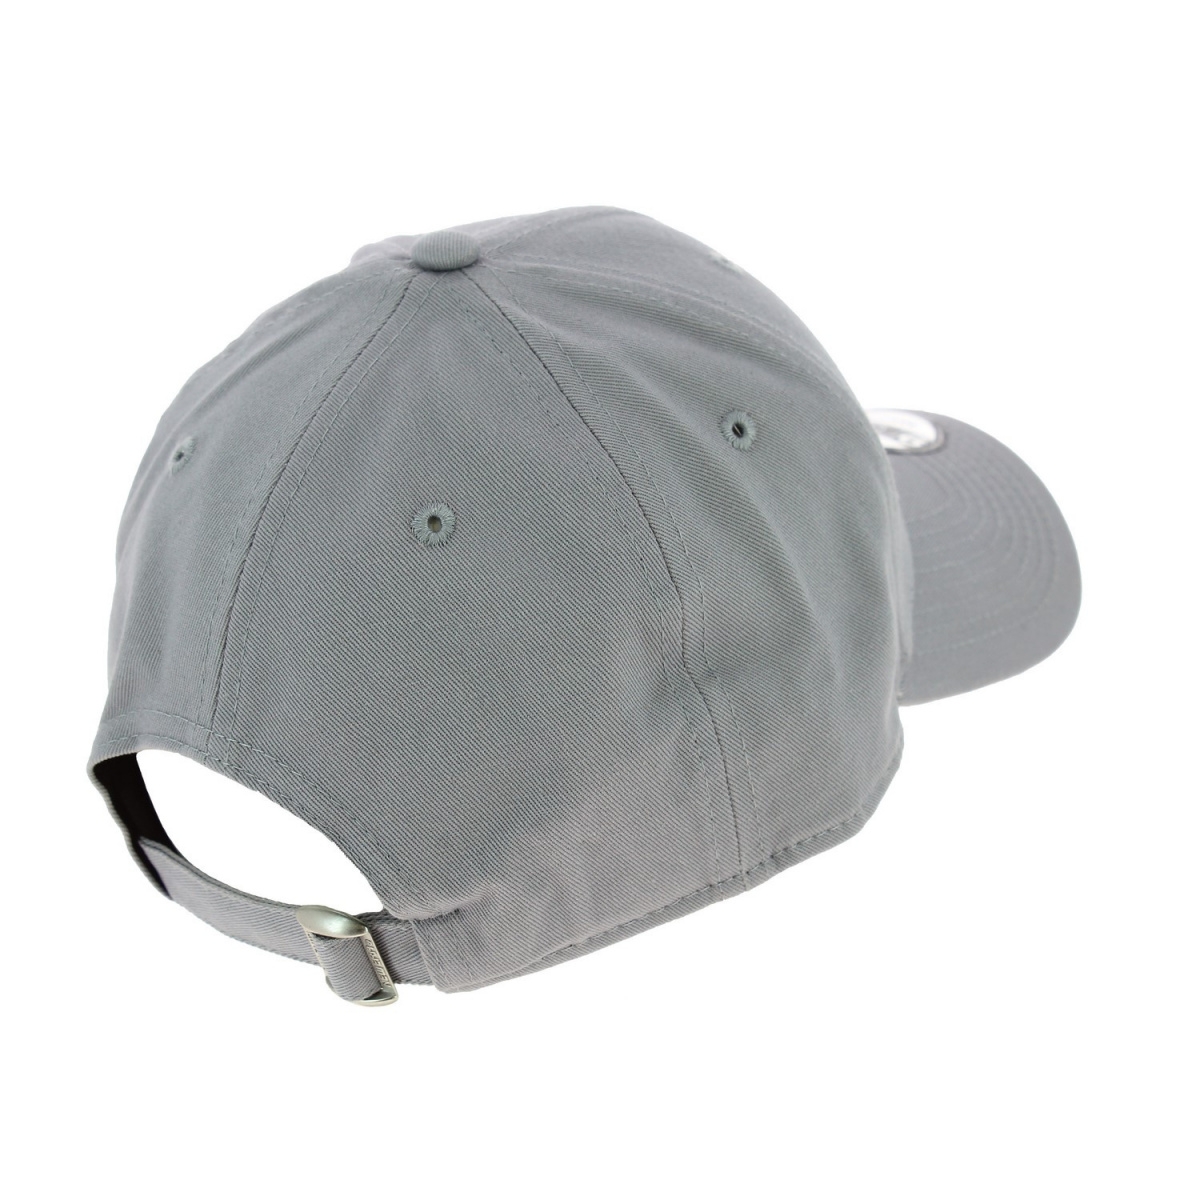 Real Baseball New Traclet : New-York Cap - Grey | 3635 Reference Chapellerie Era